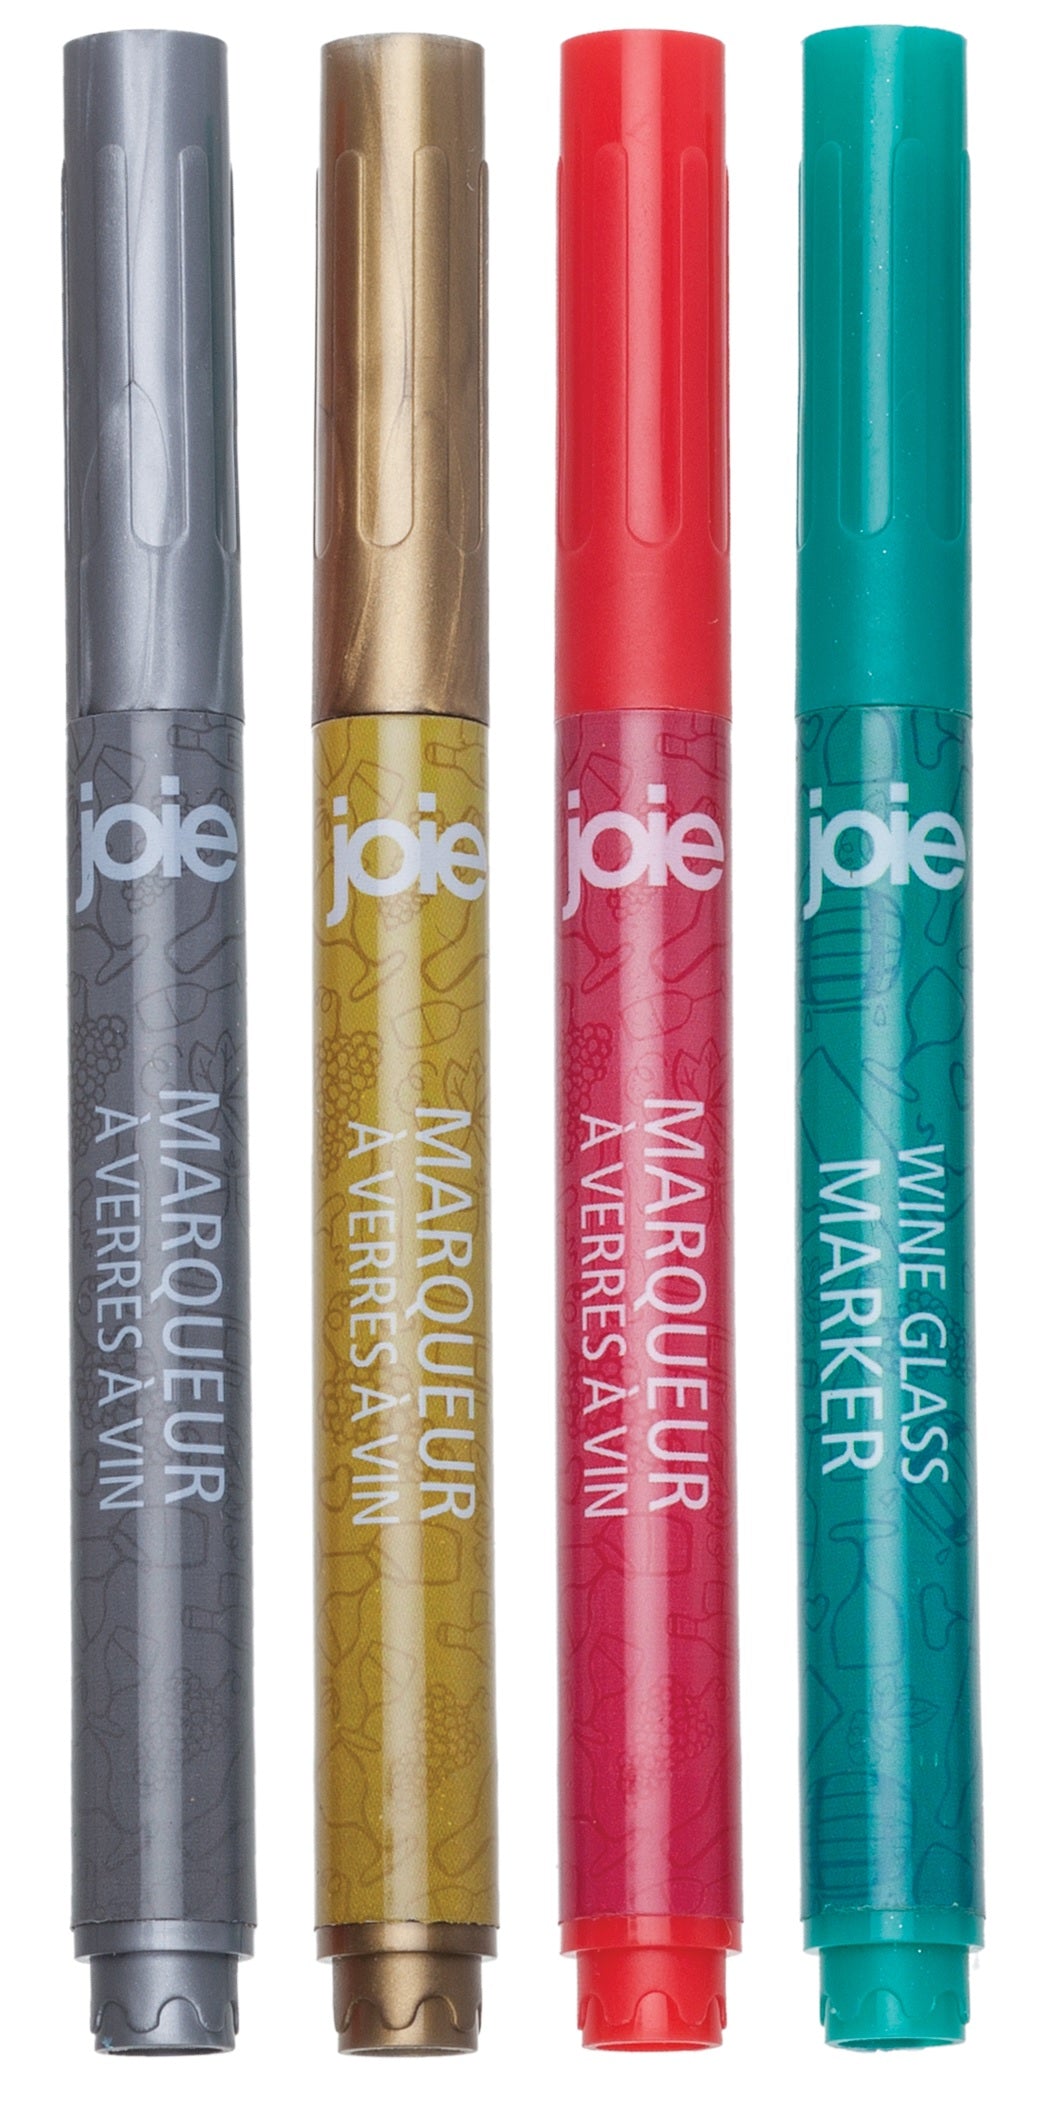 Joie MSC 10141 Wine Glass Makers, Assorted Colors